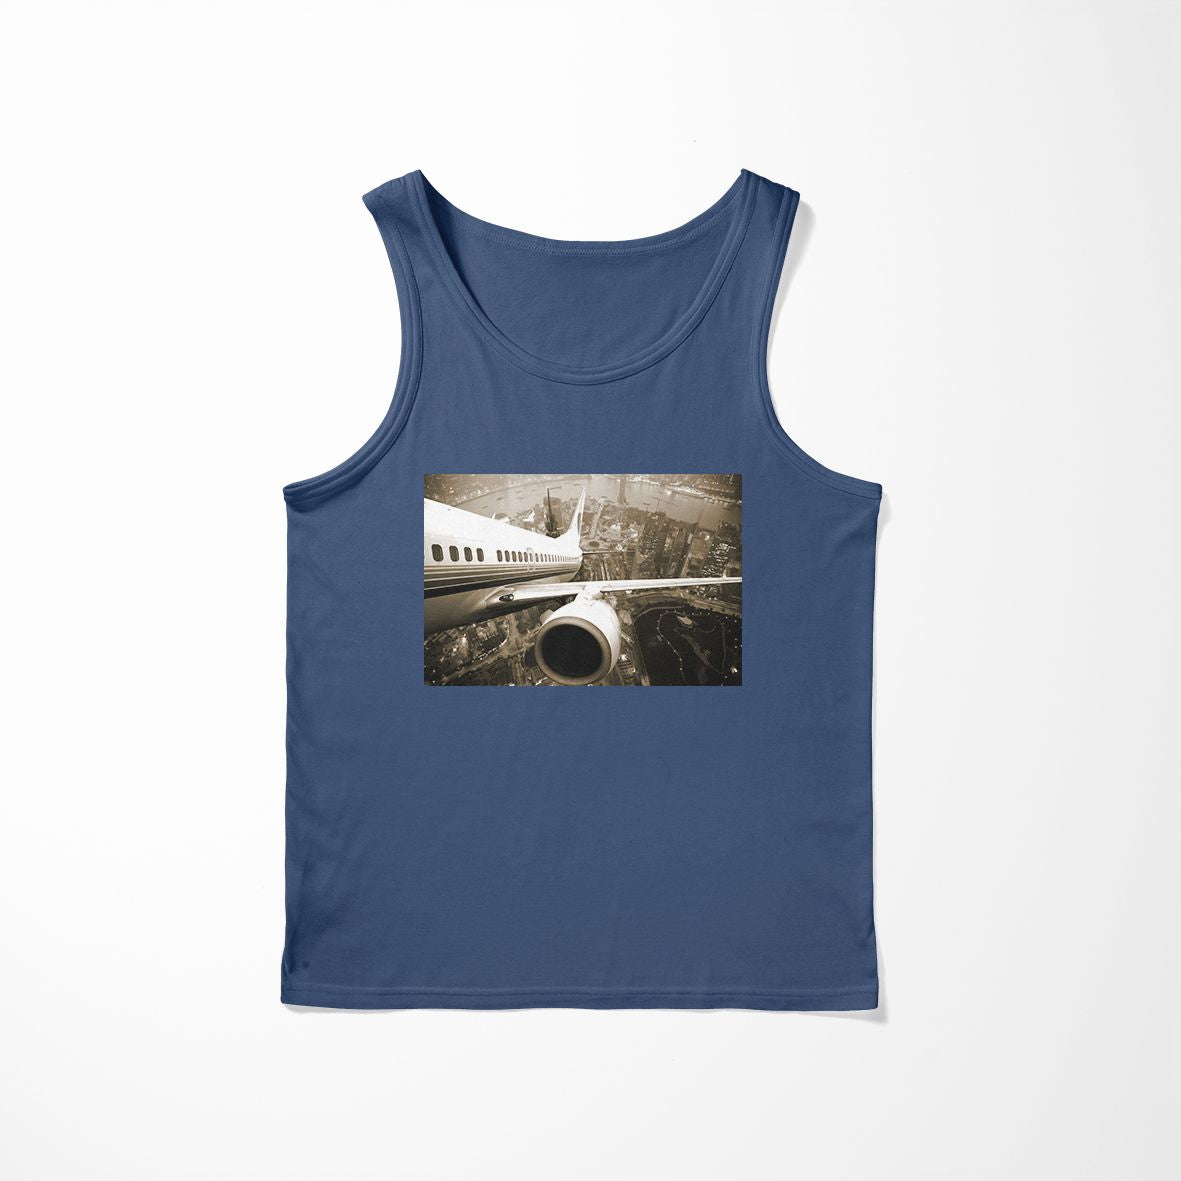 Departing Aircraft & City Scene behind Designed Tank Tops